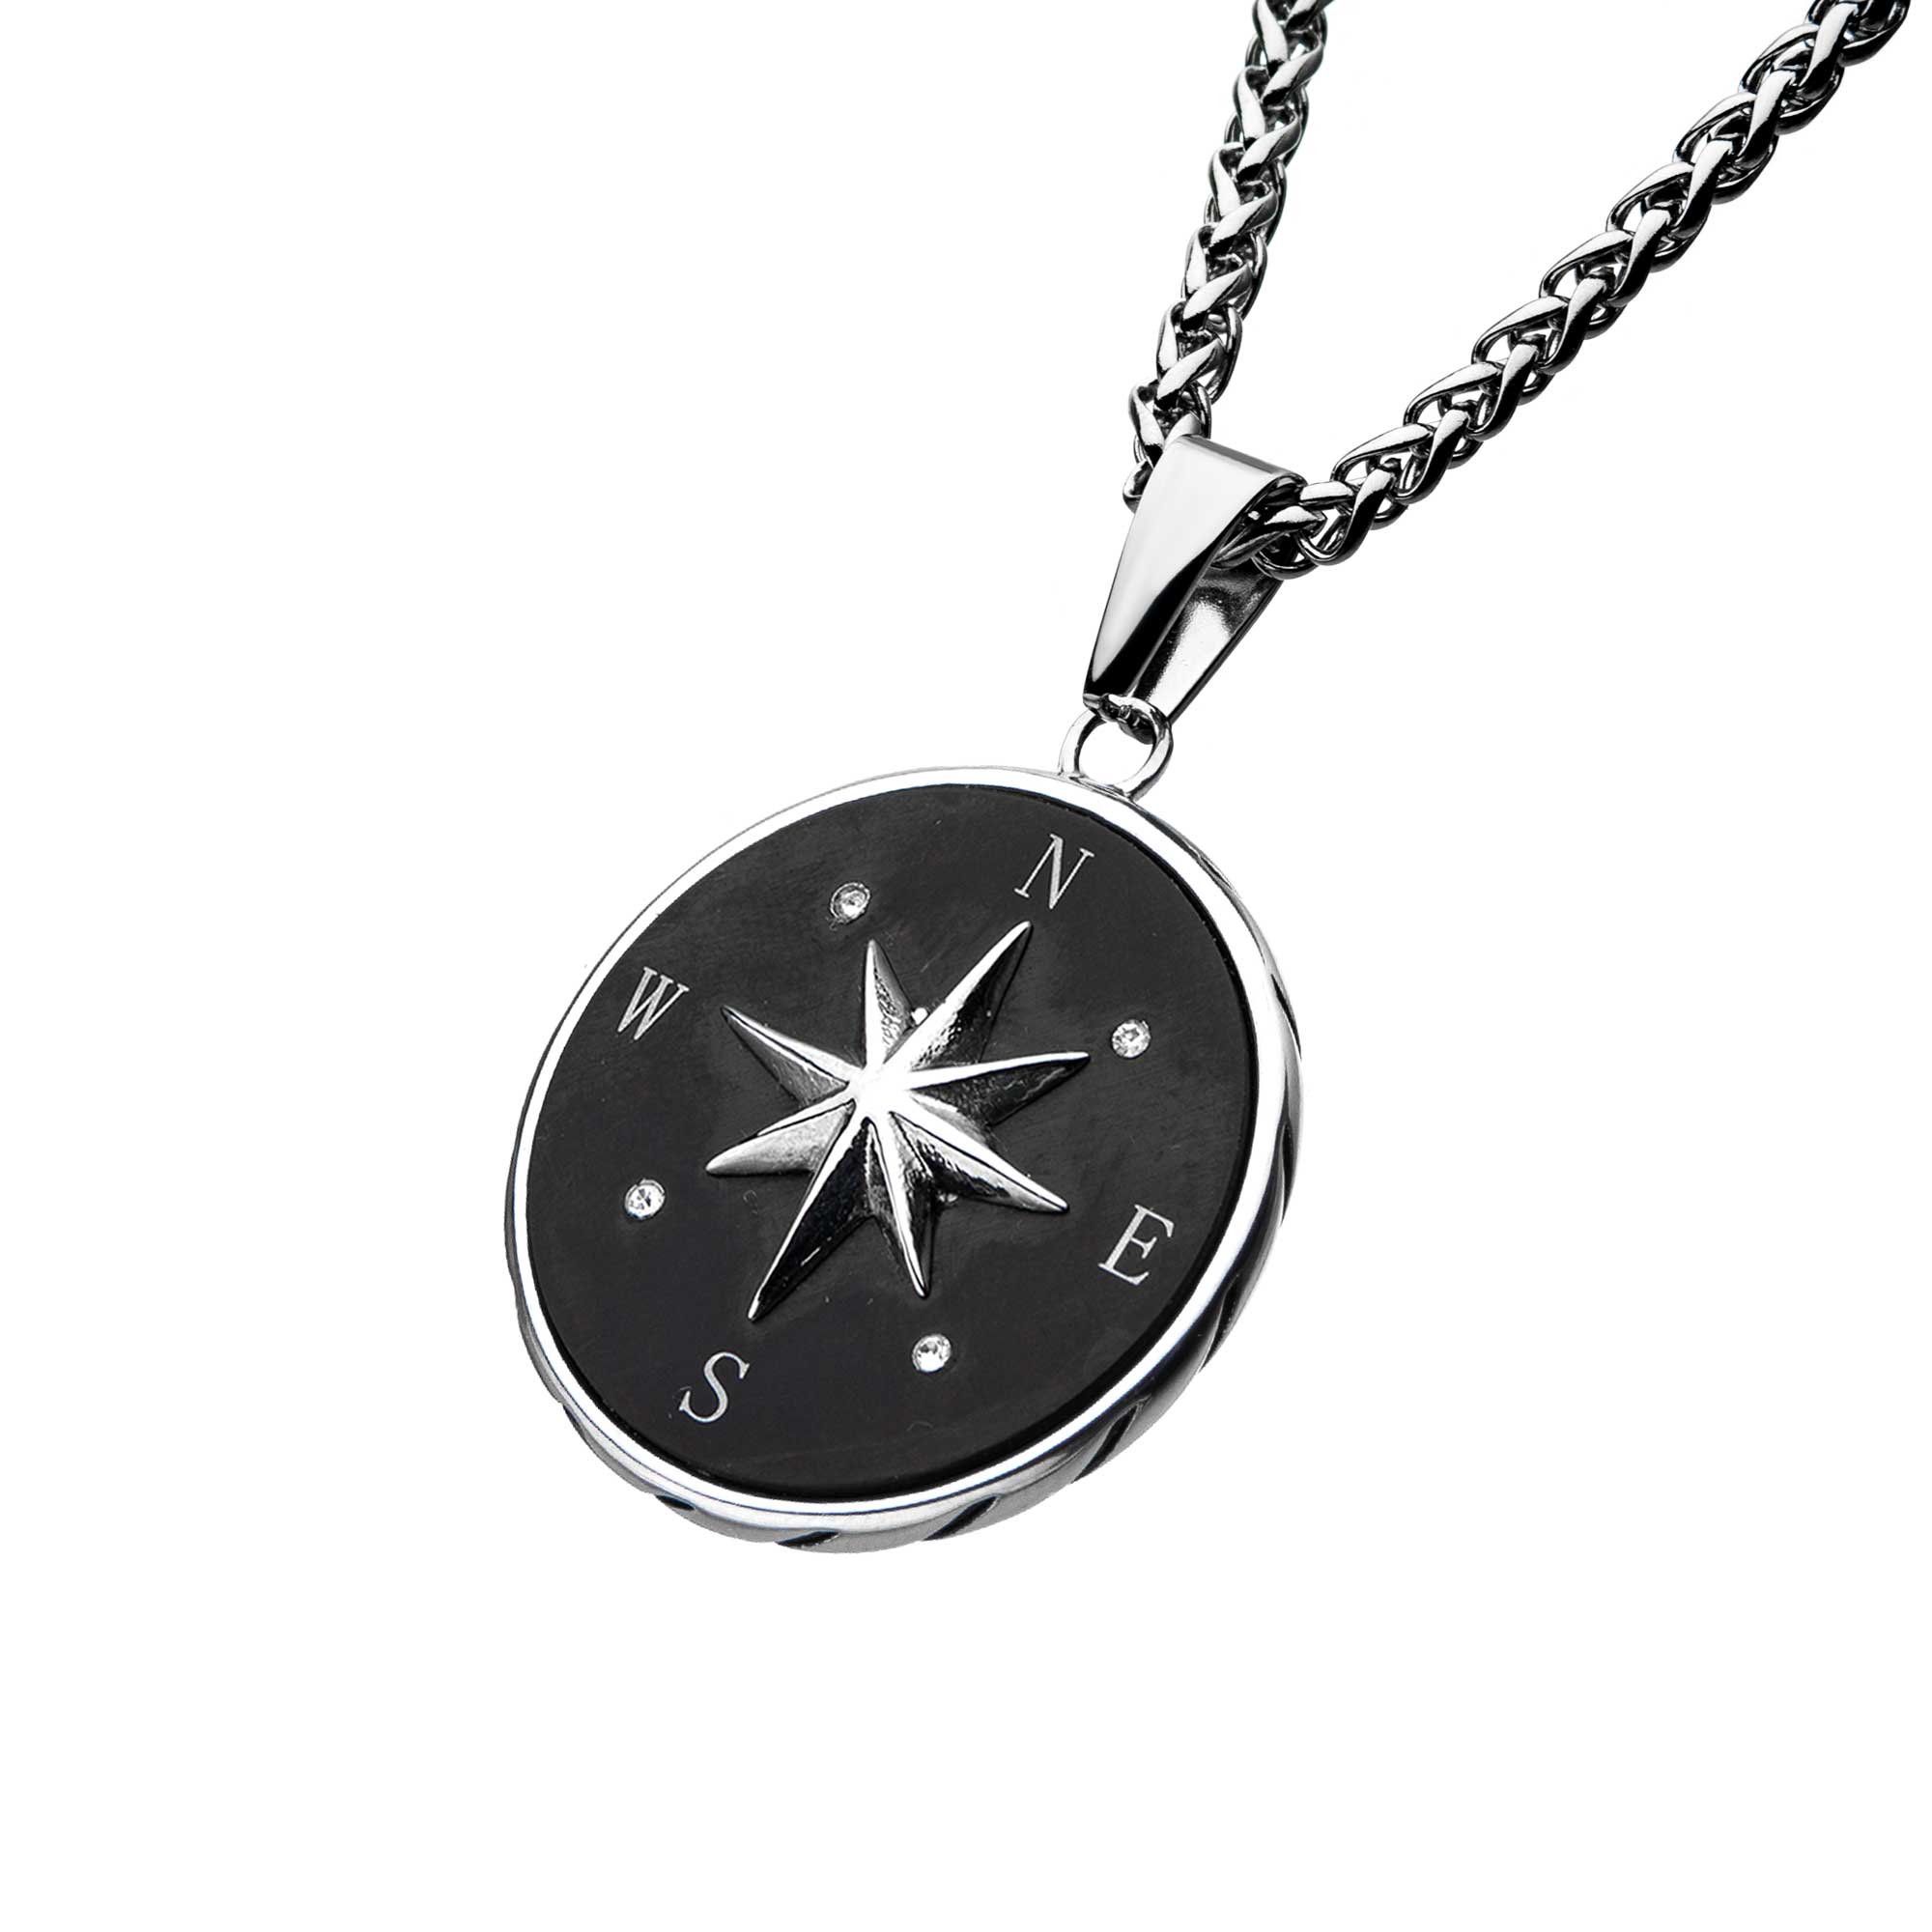 Stainless Steel and Black Plated Compass Pendant with Chain Image 2 K. Martin Jeweler Dodge City, KS